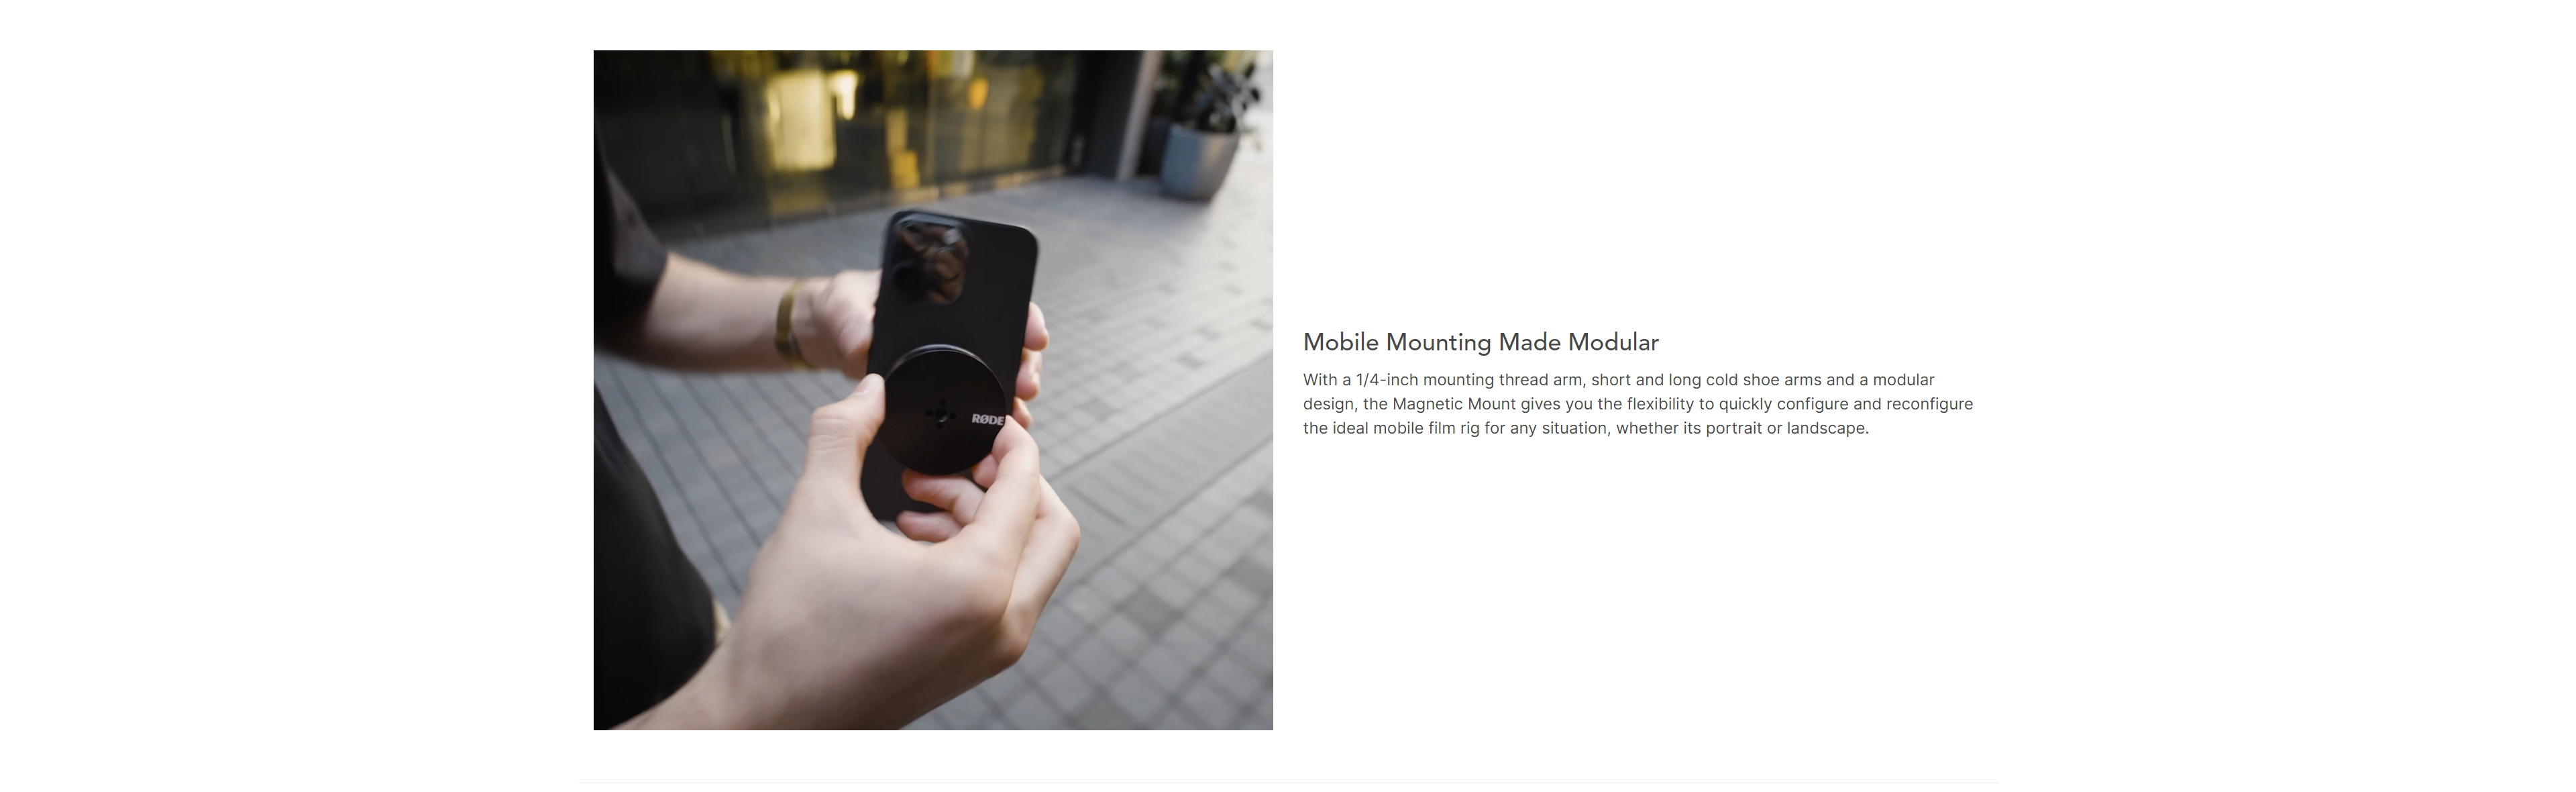 A large marketing image providing additional information about the product Rode Magnetic Smartphone Accessory Mount - Additional alt info not provided